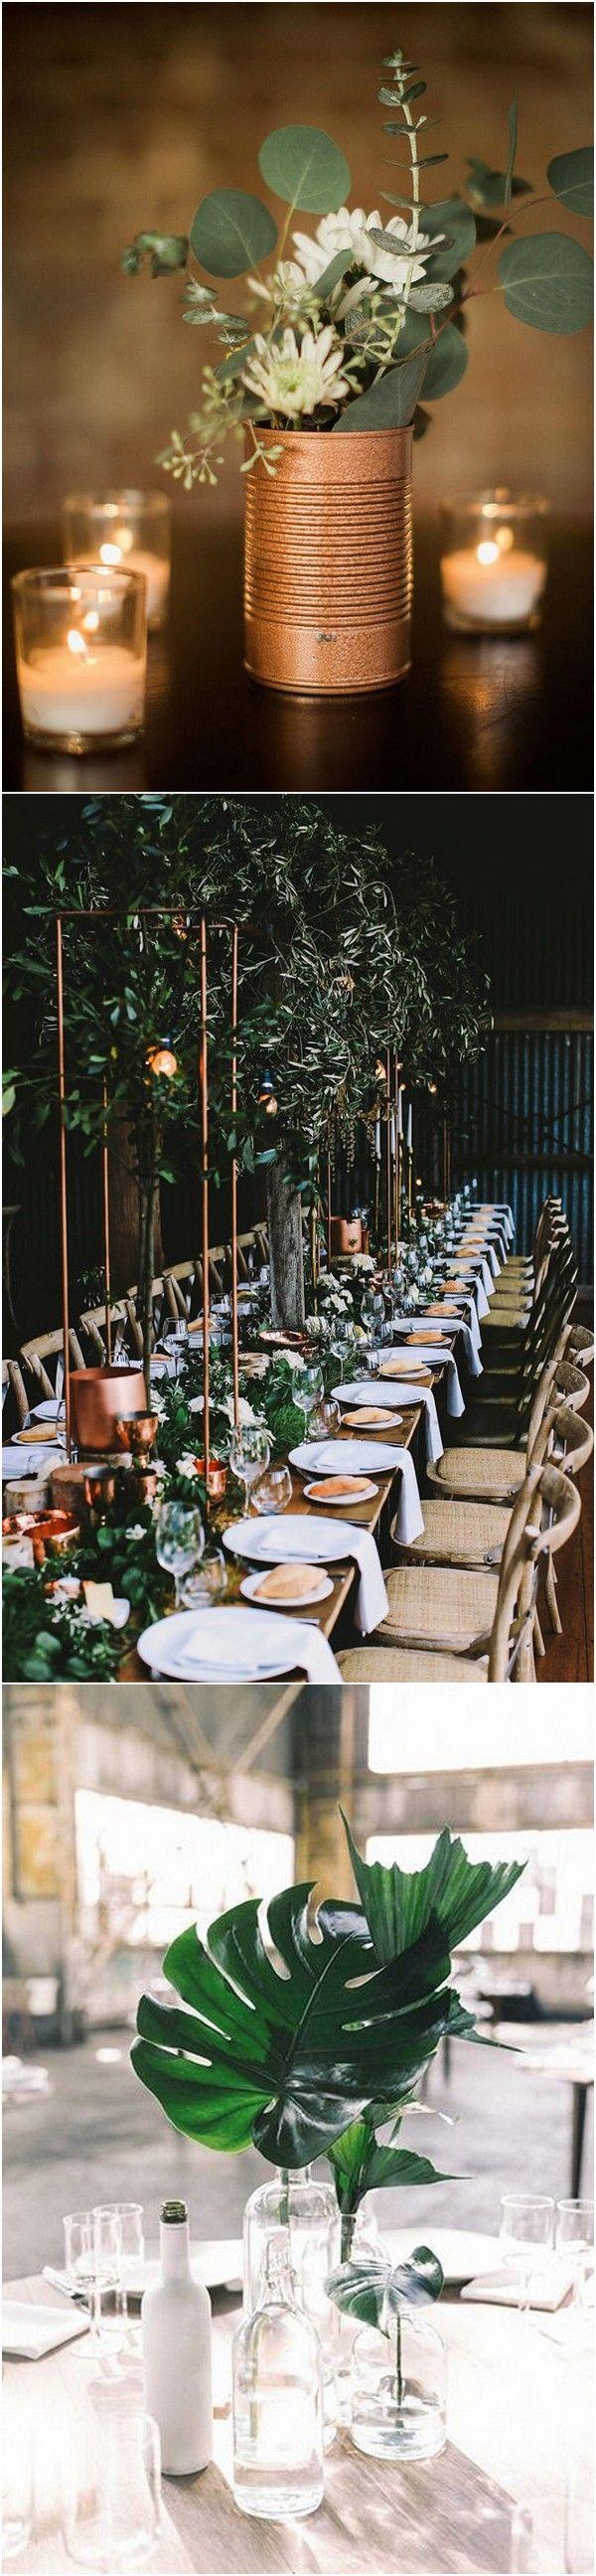 Wedding - Trending-12 Industrial Wedding Centerpiece Ideas For 2018 - Page 2 Of 2